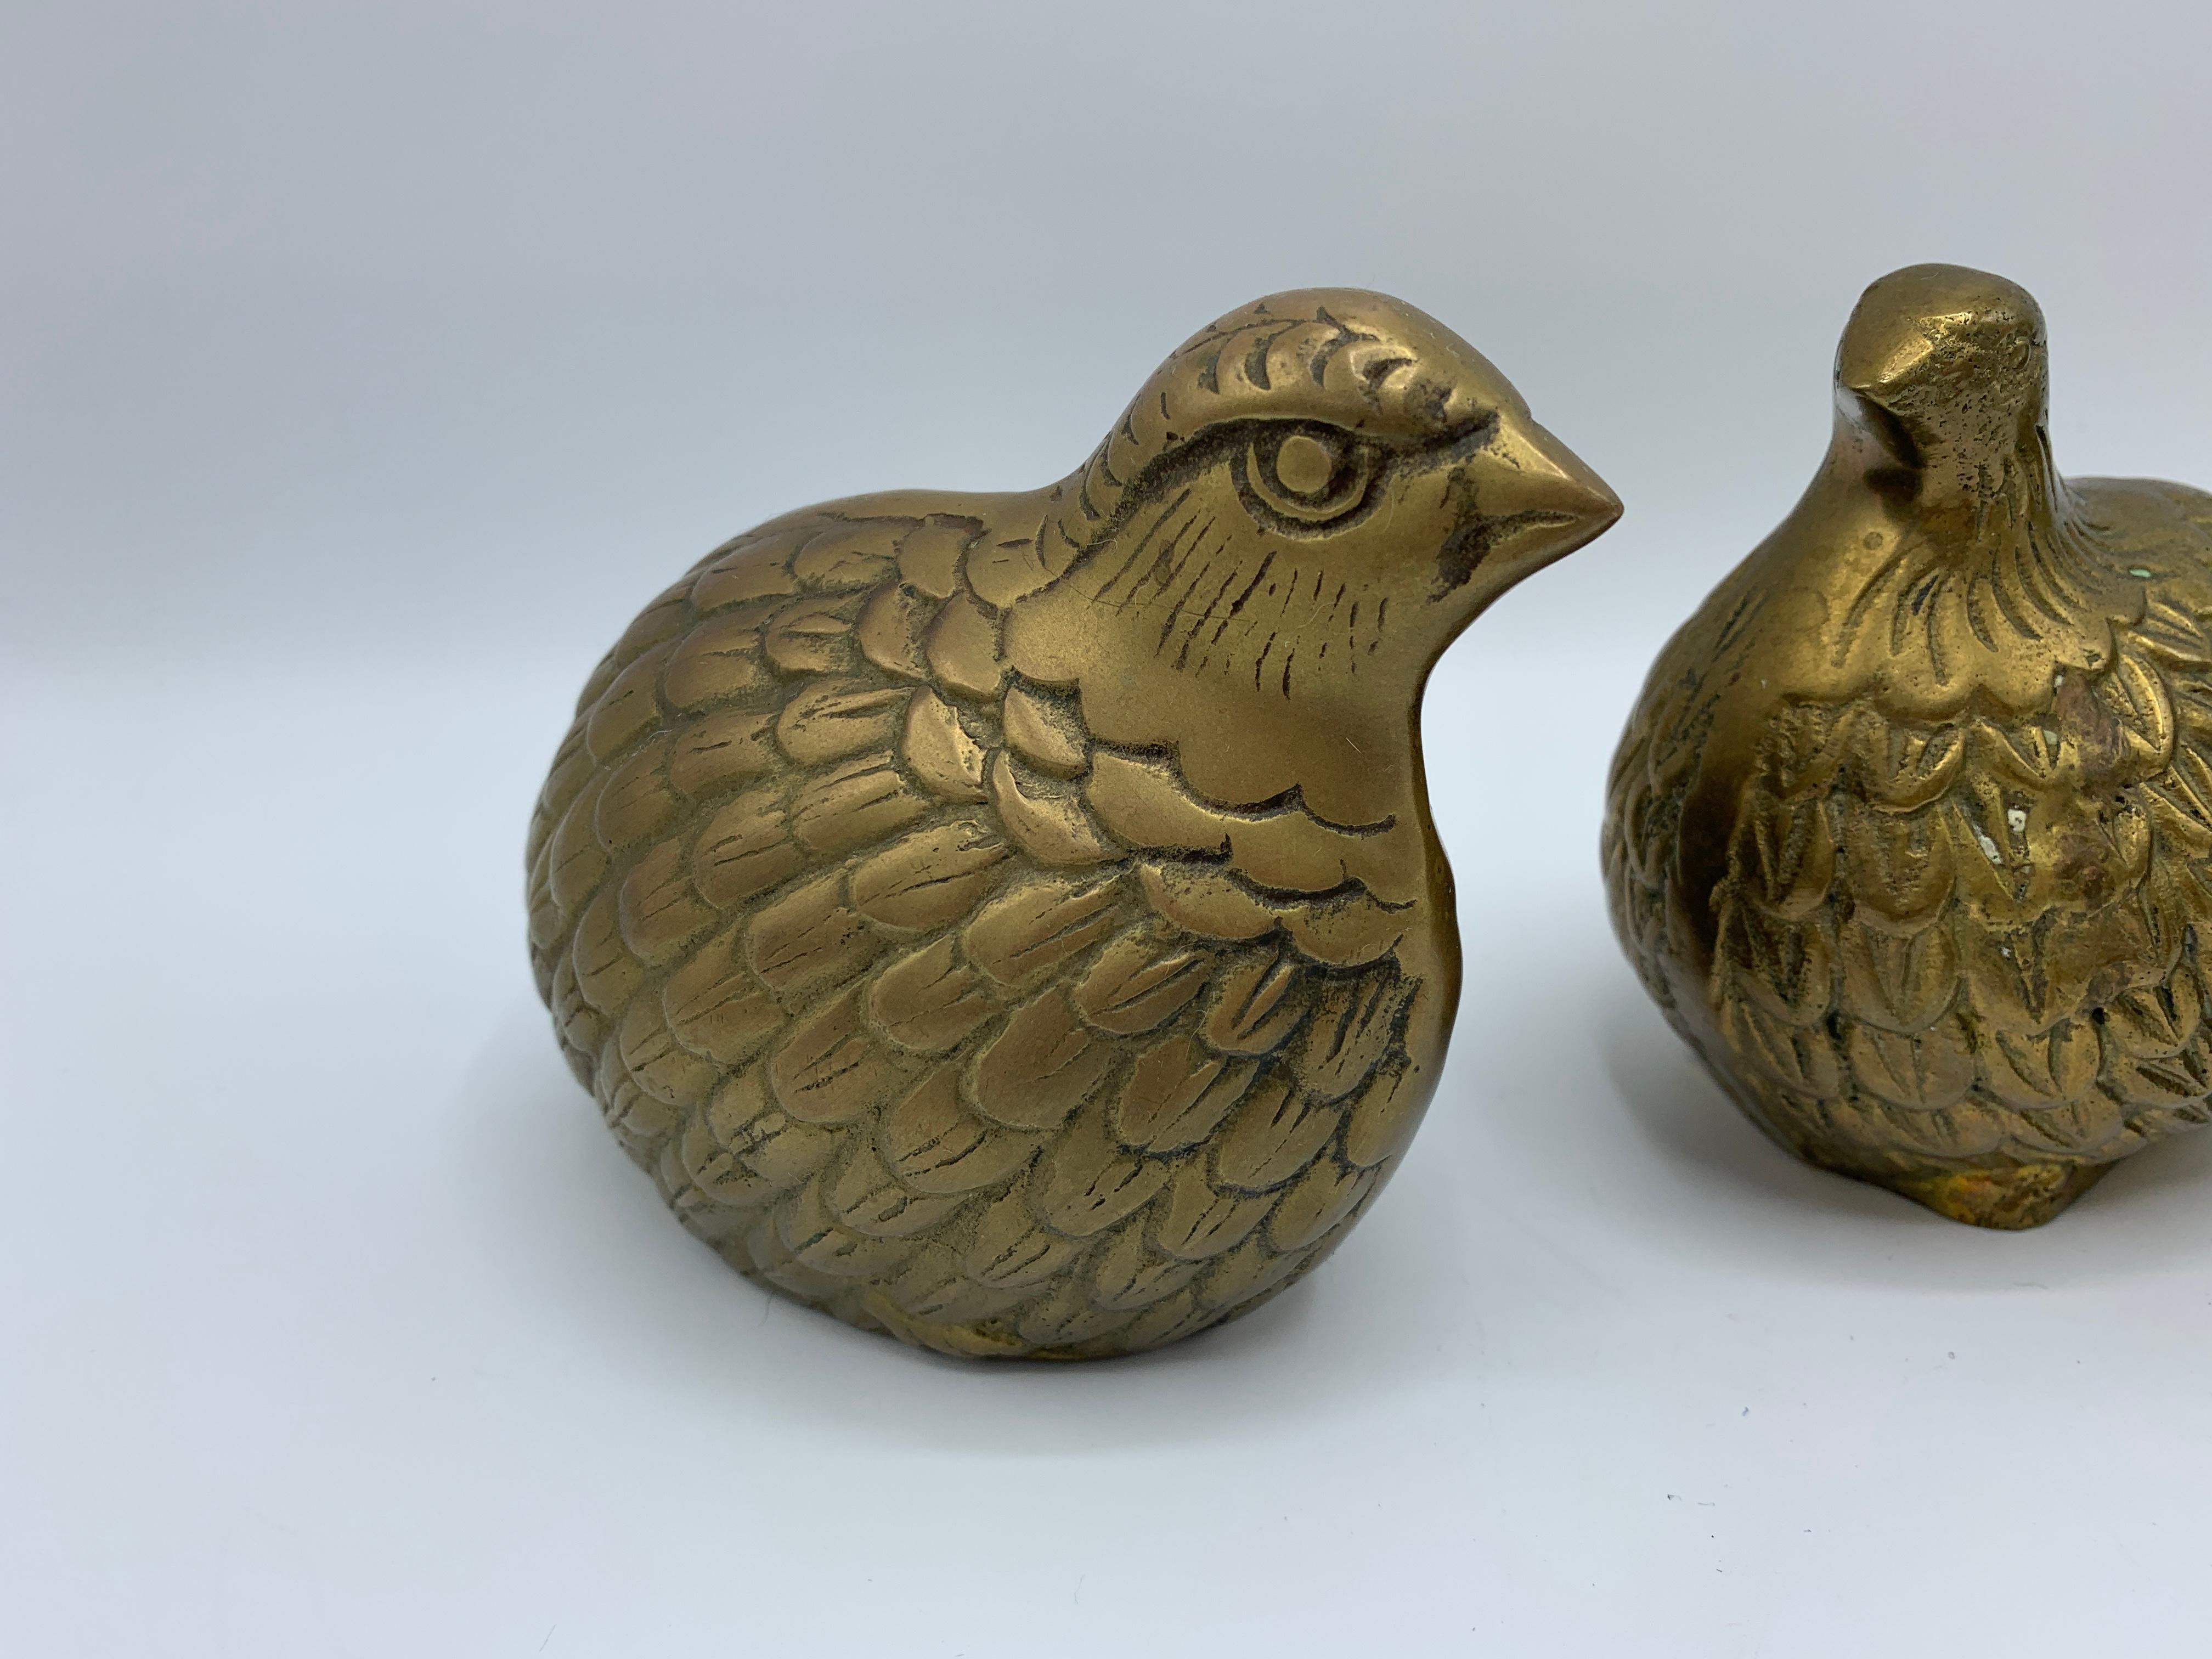 Offered is a beautiful, set of four, 1960s brass quail bird sculptures. Hallowed, but heavy-weighing nearly 5lbs for the set. Varying heights.

Measures from tallest to shortest:
4.5in H x 4.25in W x 3in D
4in H x 4.25in W x 2.75in D
3.75in H x